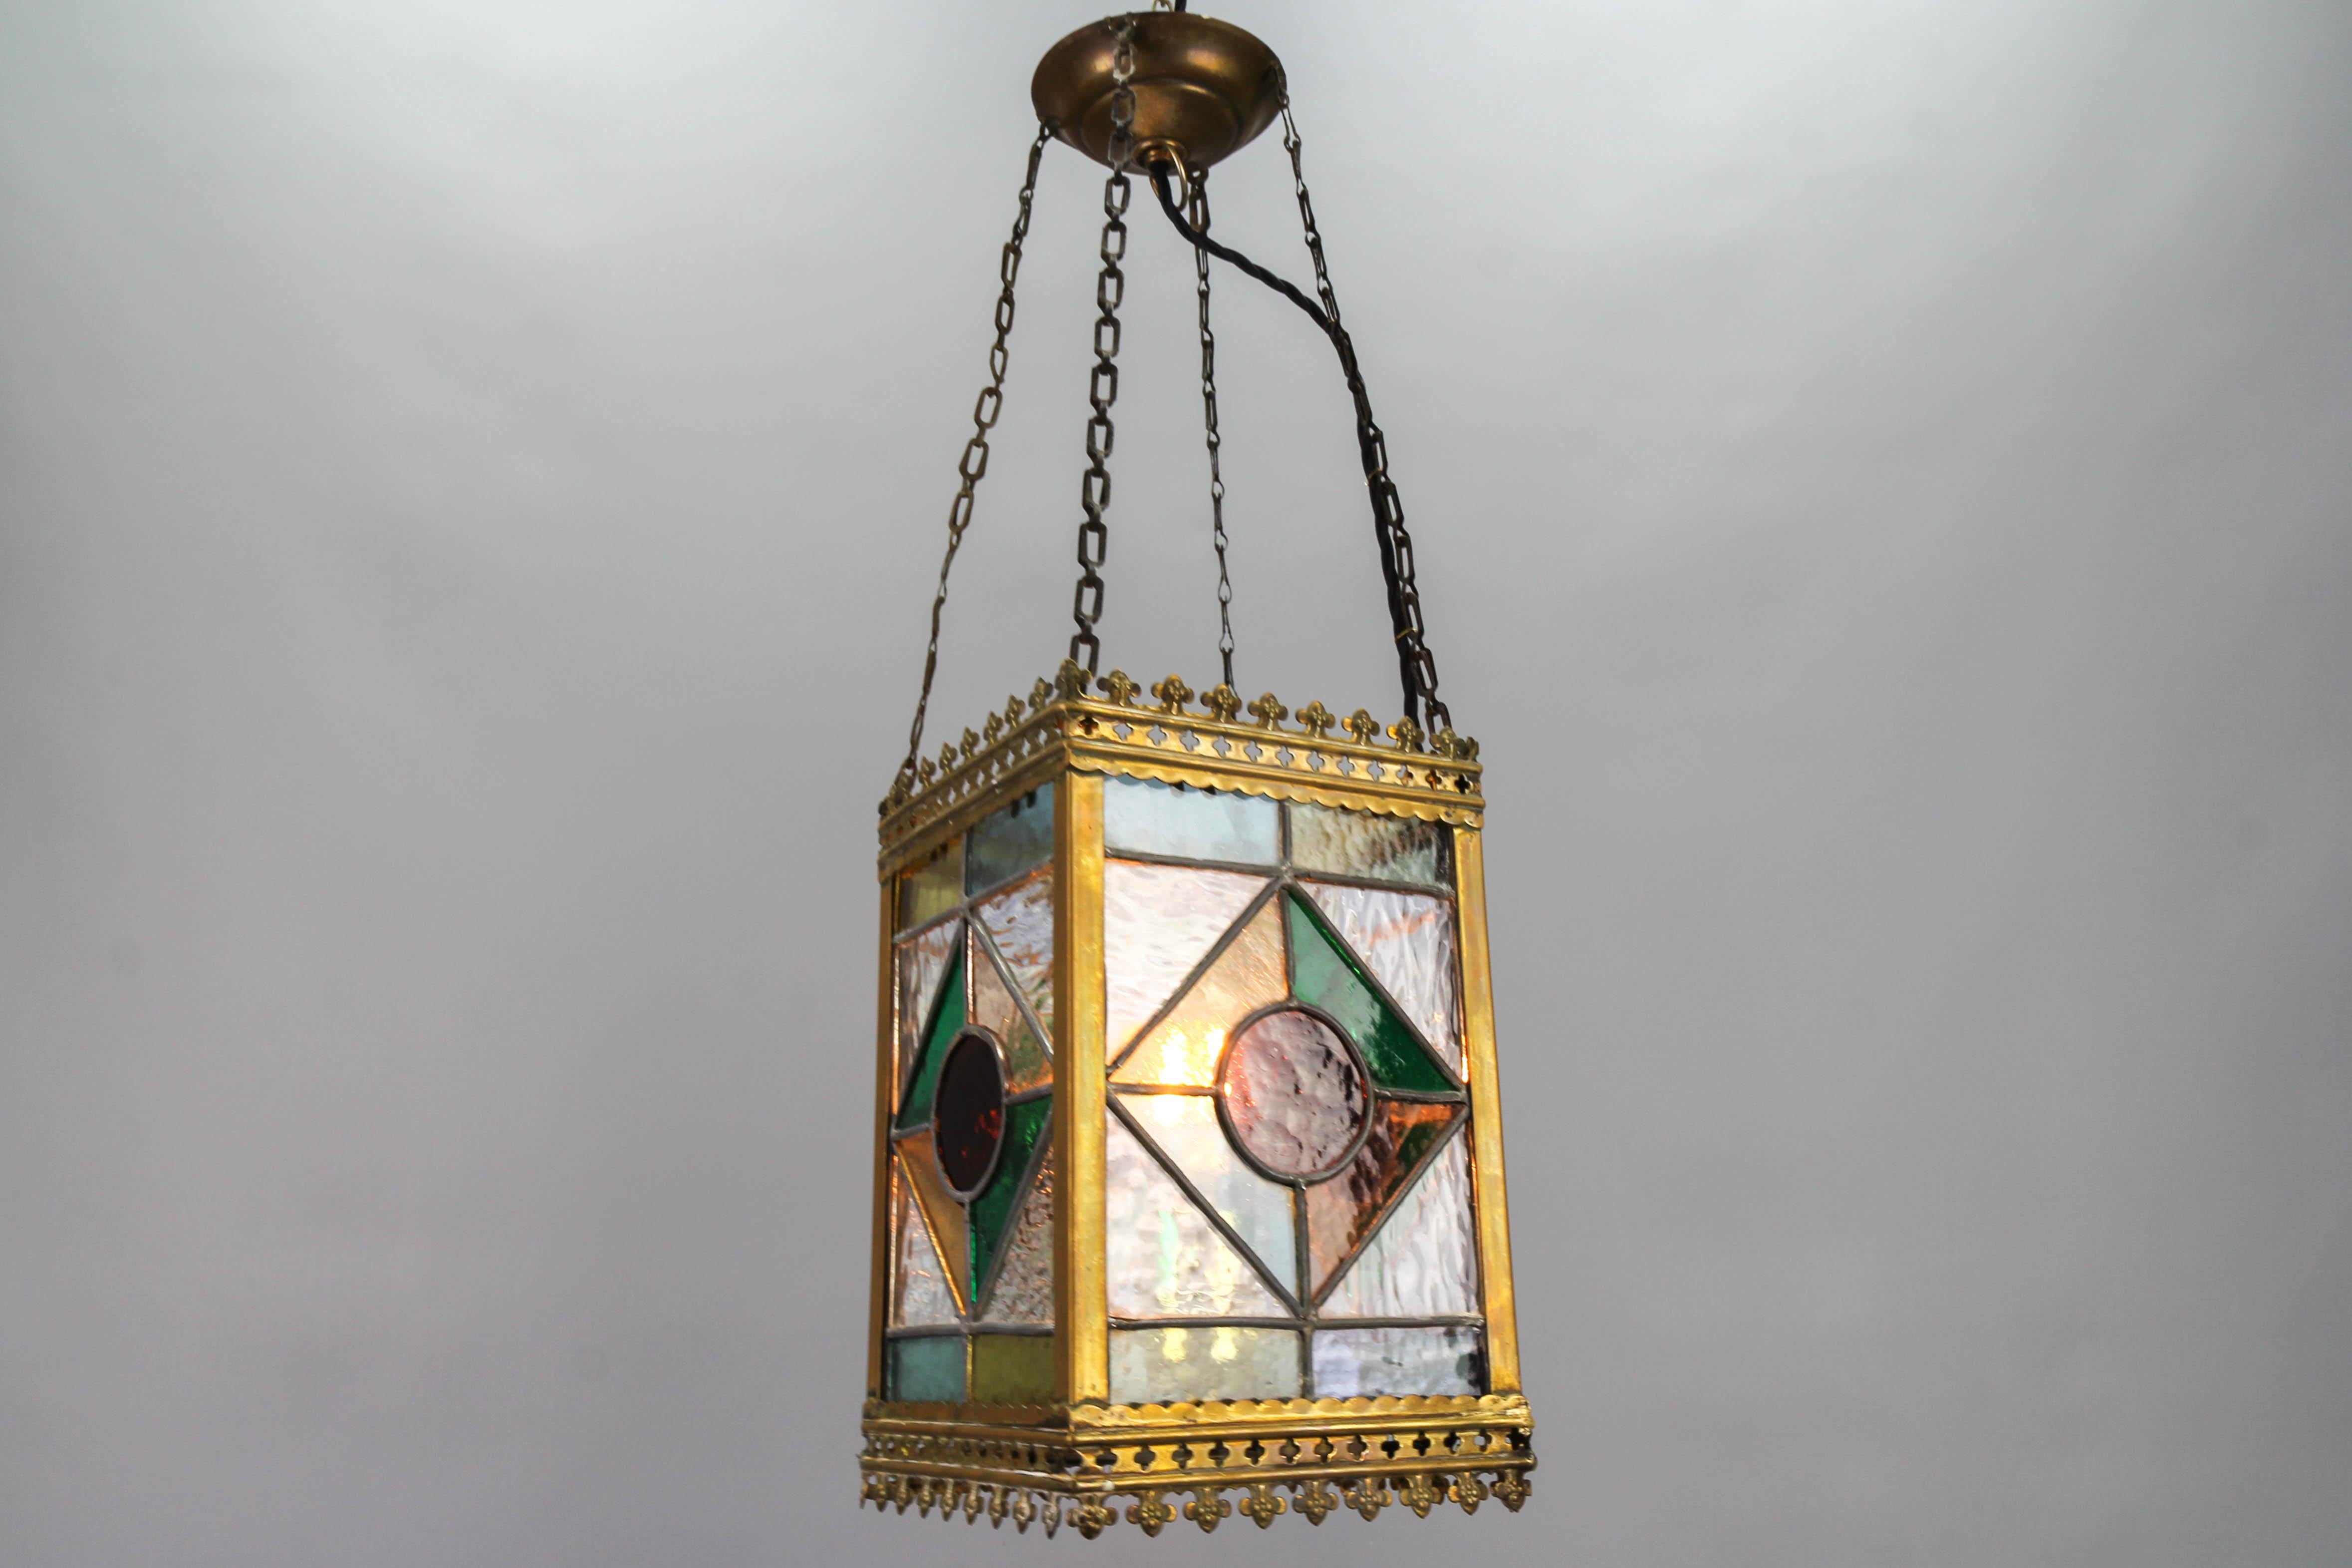 This delightful Victorian Gothic-style stained glass hall lantern is an ideal lantern for lighting in the entrance hallway. It is an antique, later electrified square lantern from the 1890s, probably Germany, with a geometric pattern that features